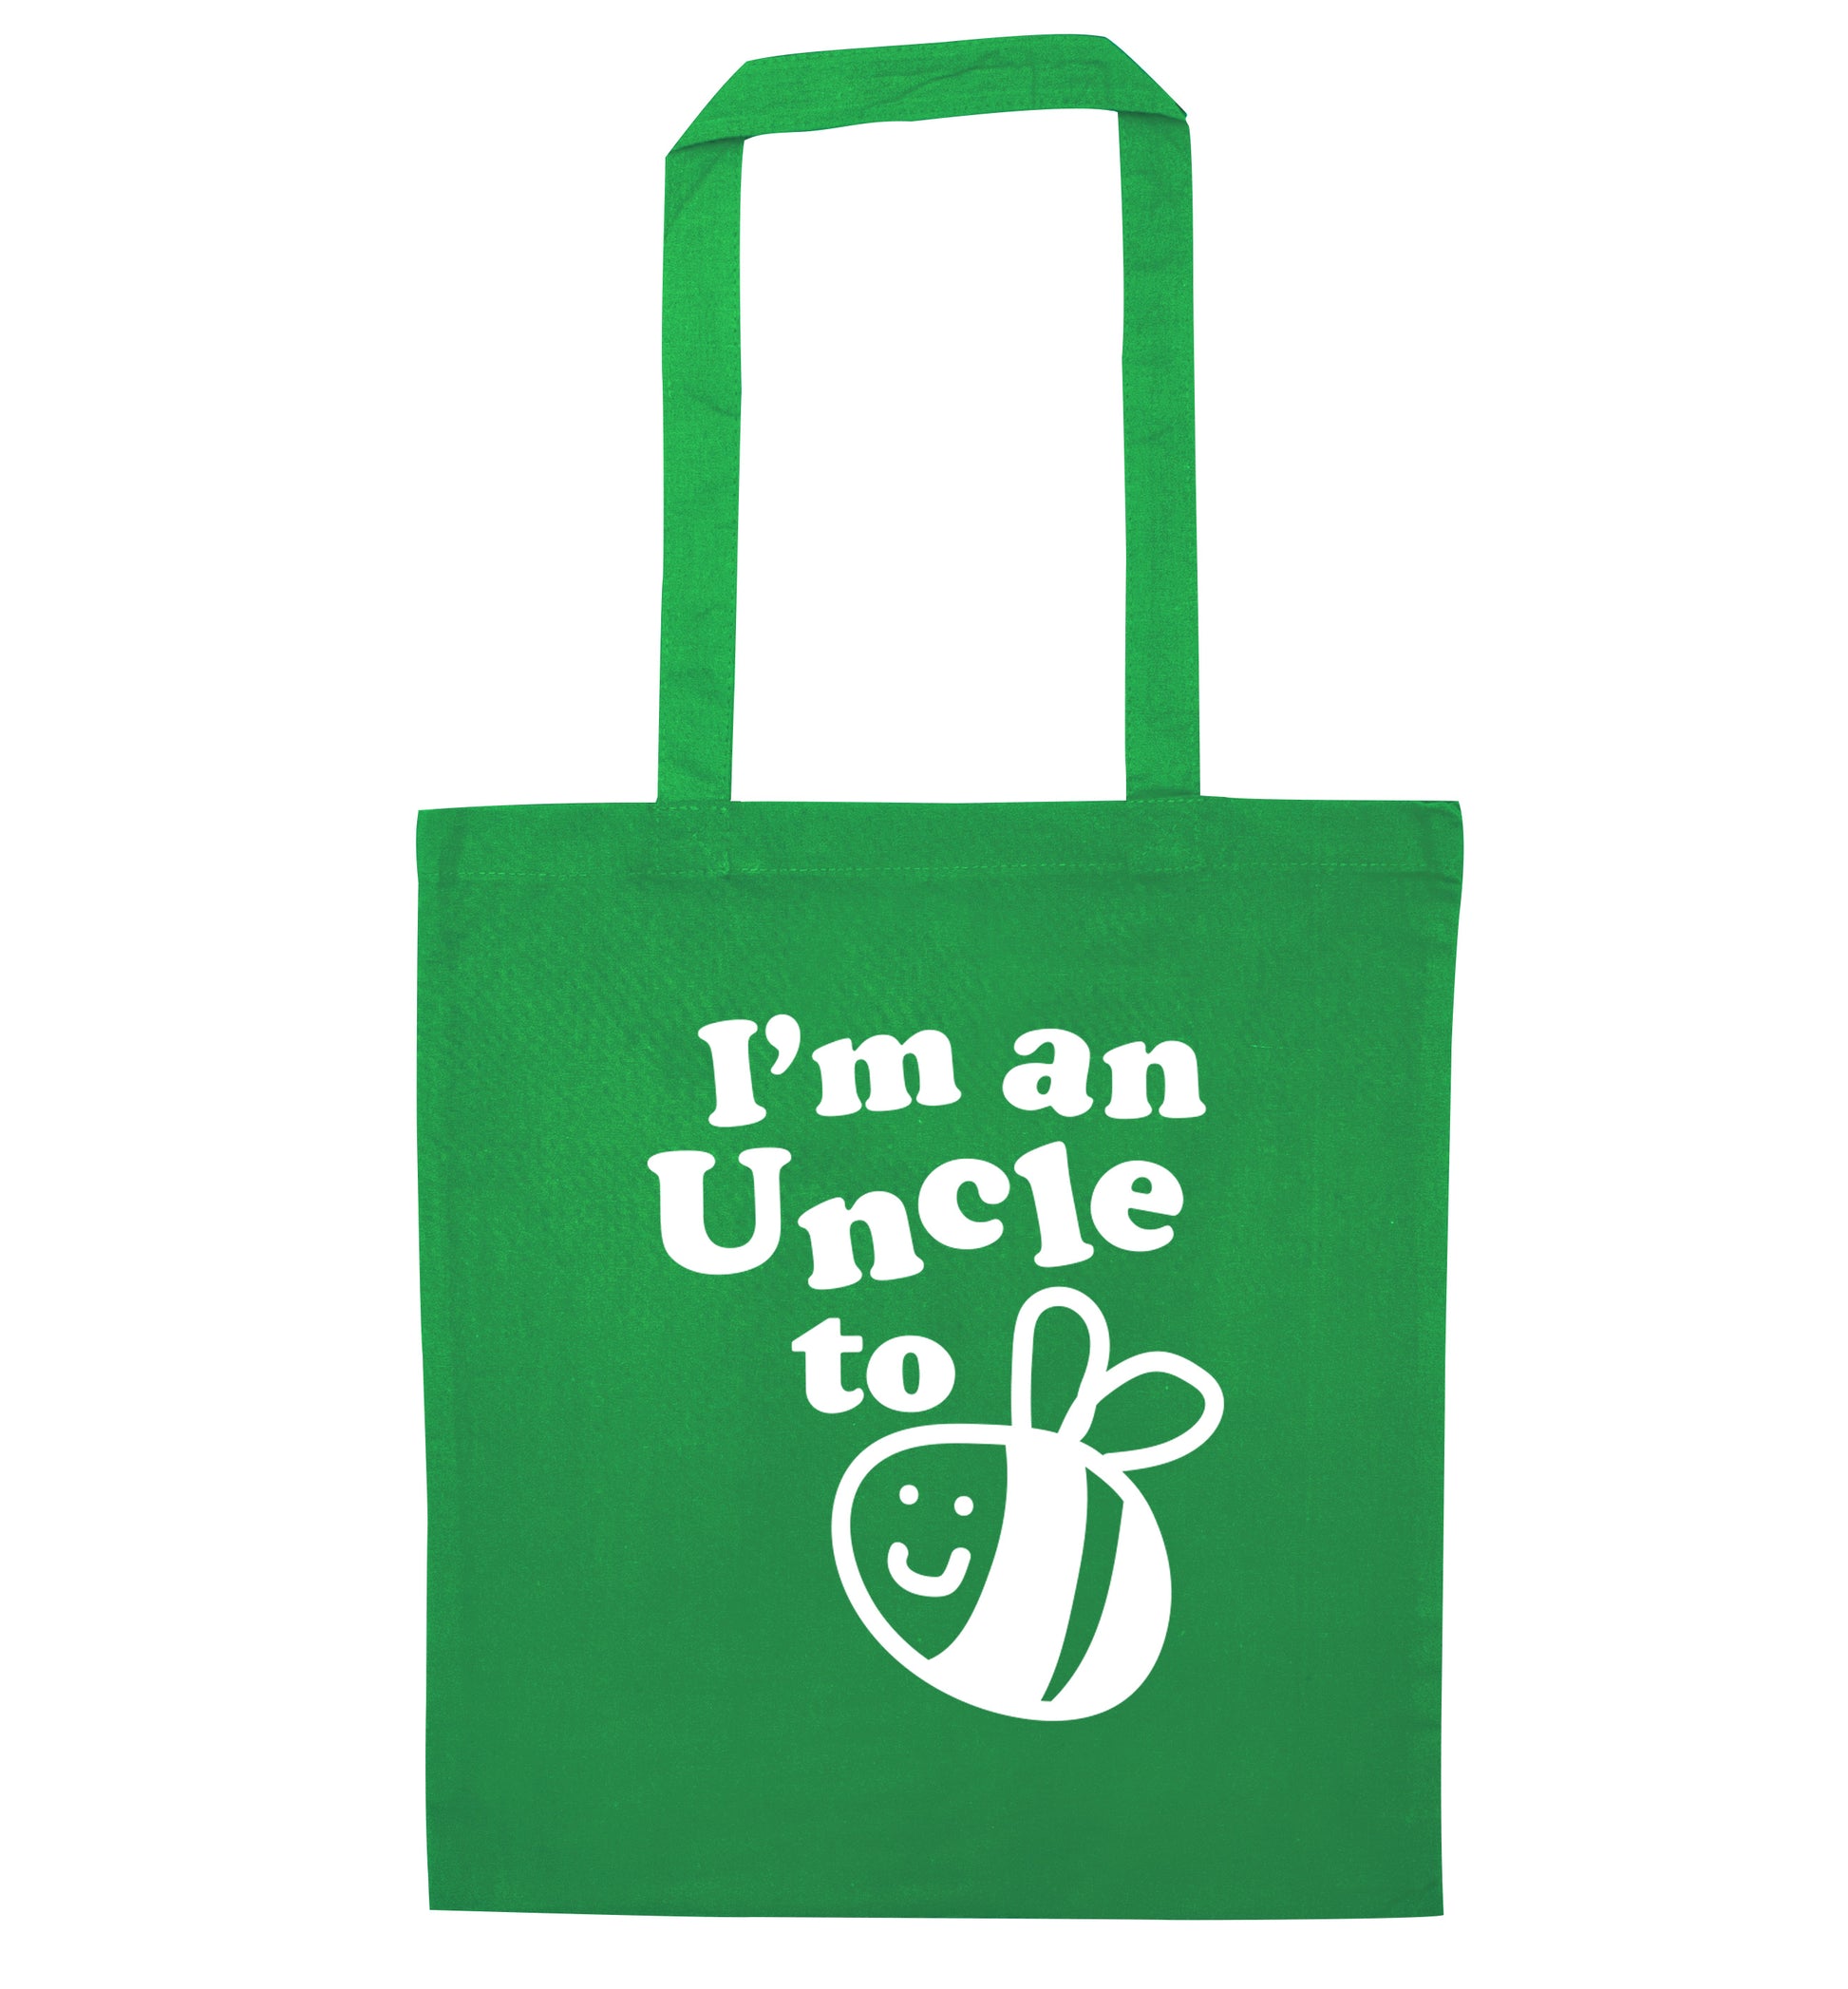 I'm an uncle to be green tote bag